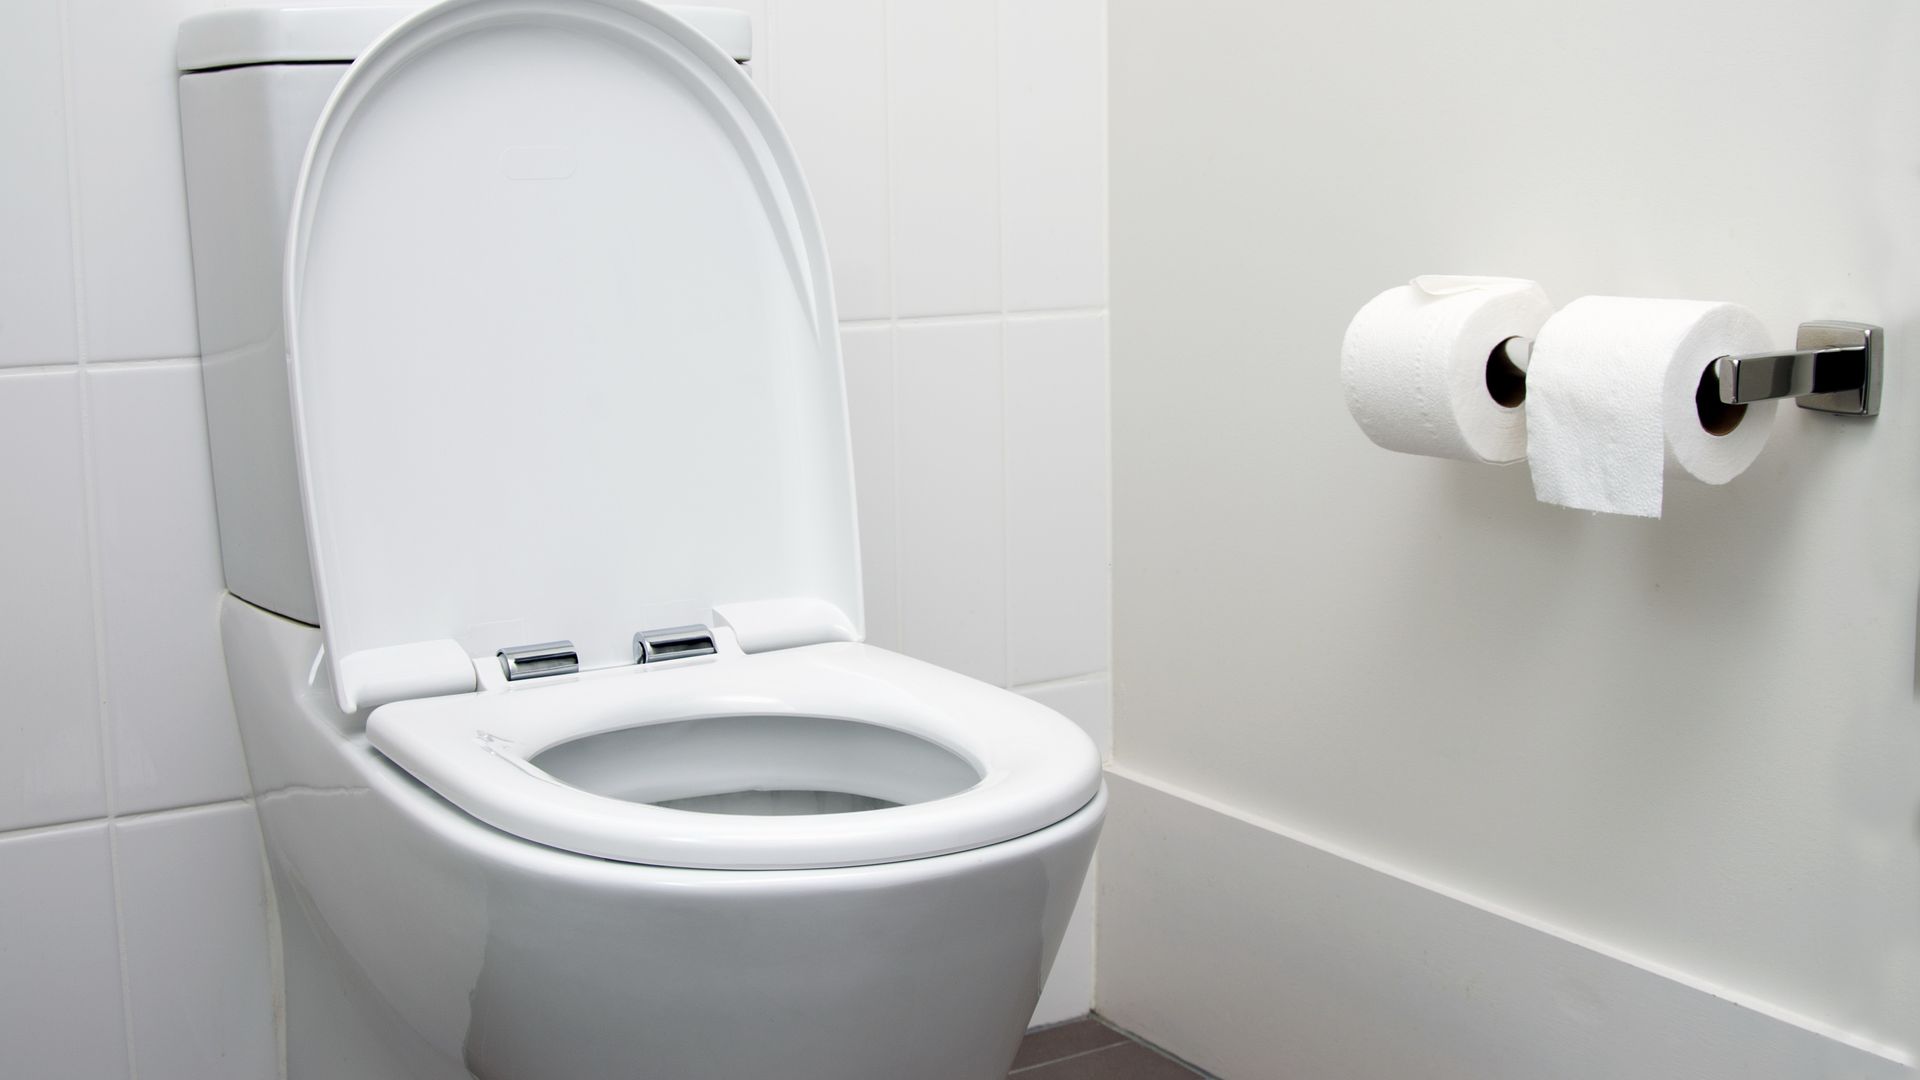 Image of a standard toilet